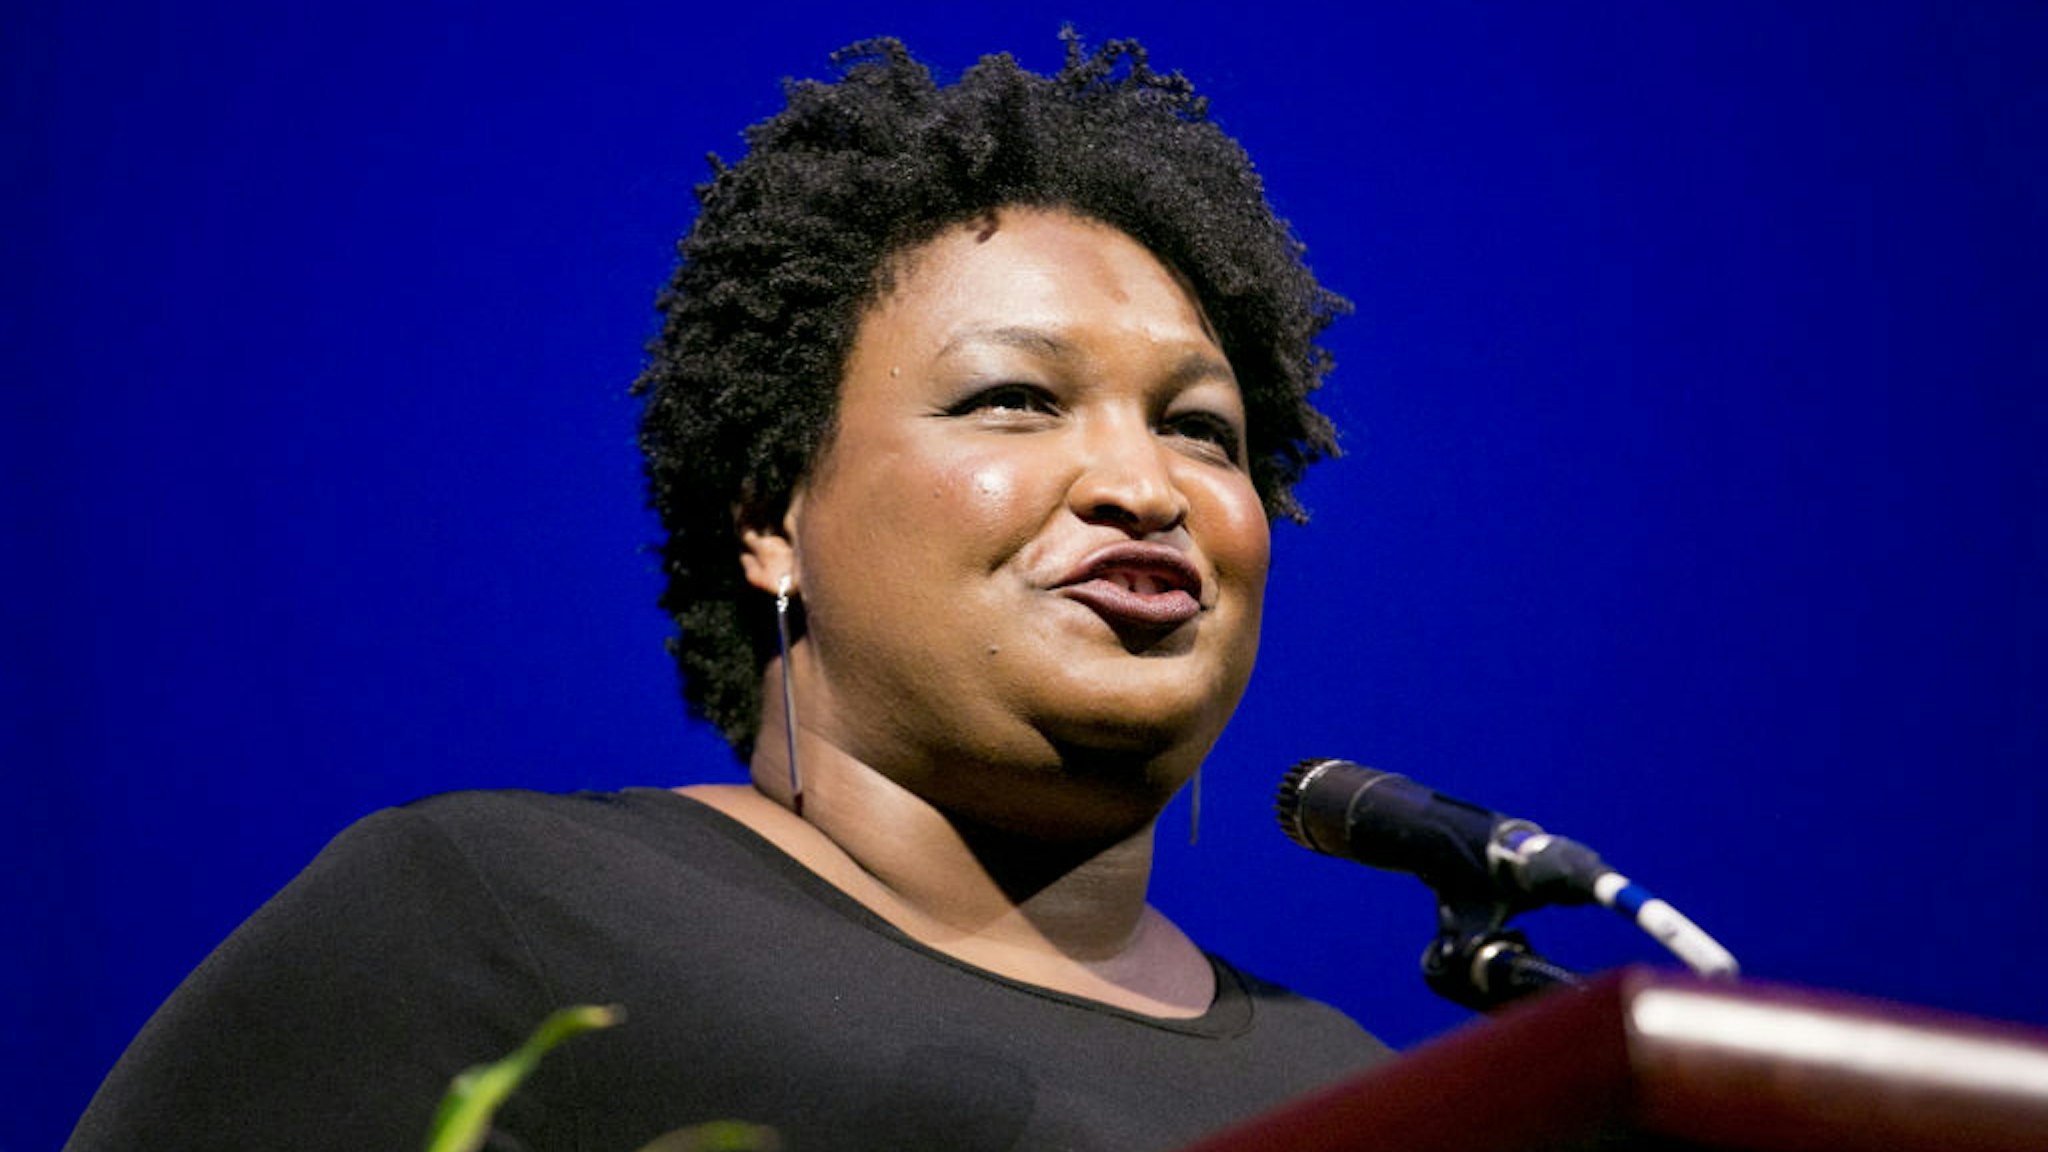 Stacey Abrams, former state Representative from Georgia, speaks during the 110th NAACP Annual Convention in Detroit, Michigan, U.S., on Monday, July 22, 2019.